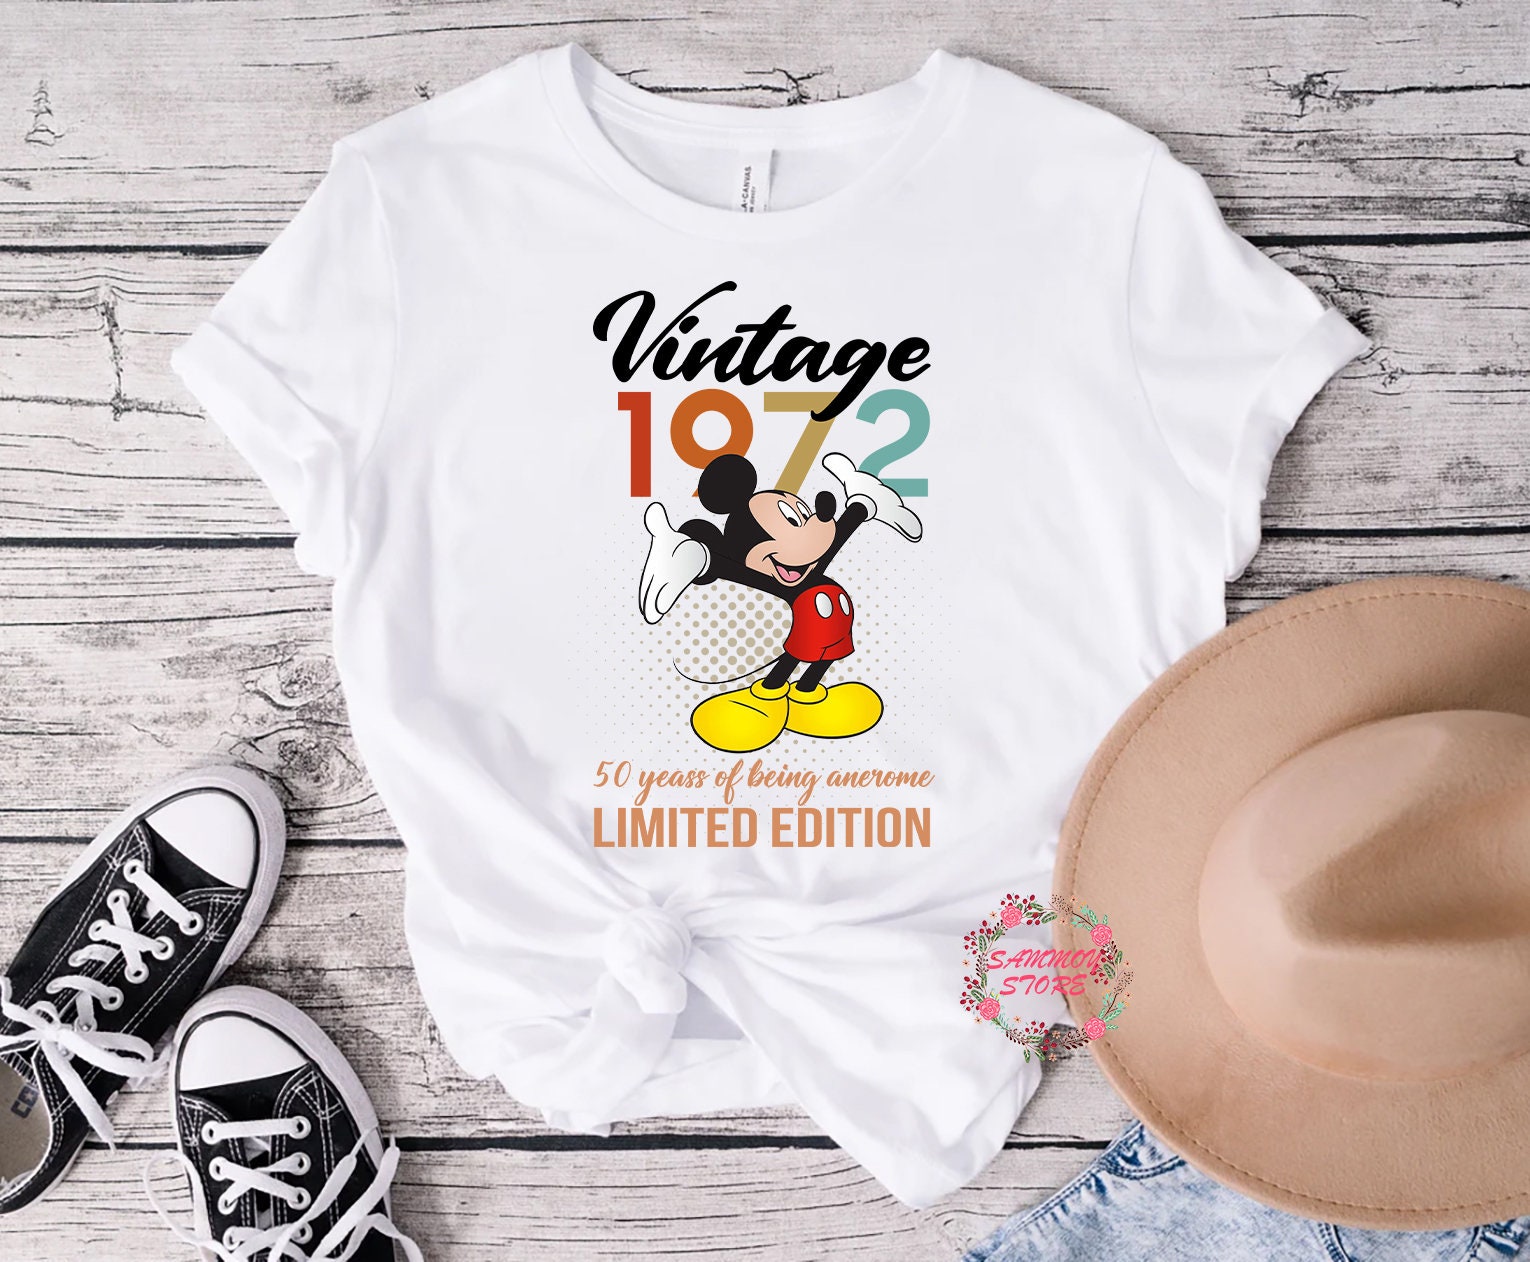 Discover Custom Vintage 1972 50 Years Of Being Awesome Shirt, Mickey Mouse 50 Years Old Shirt